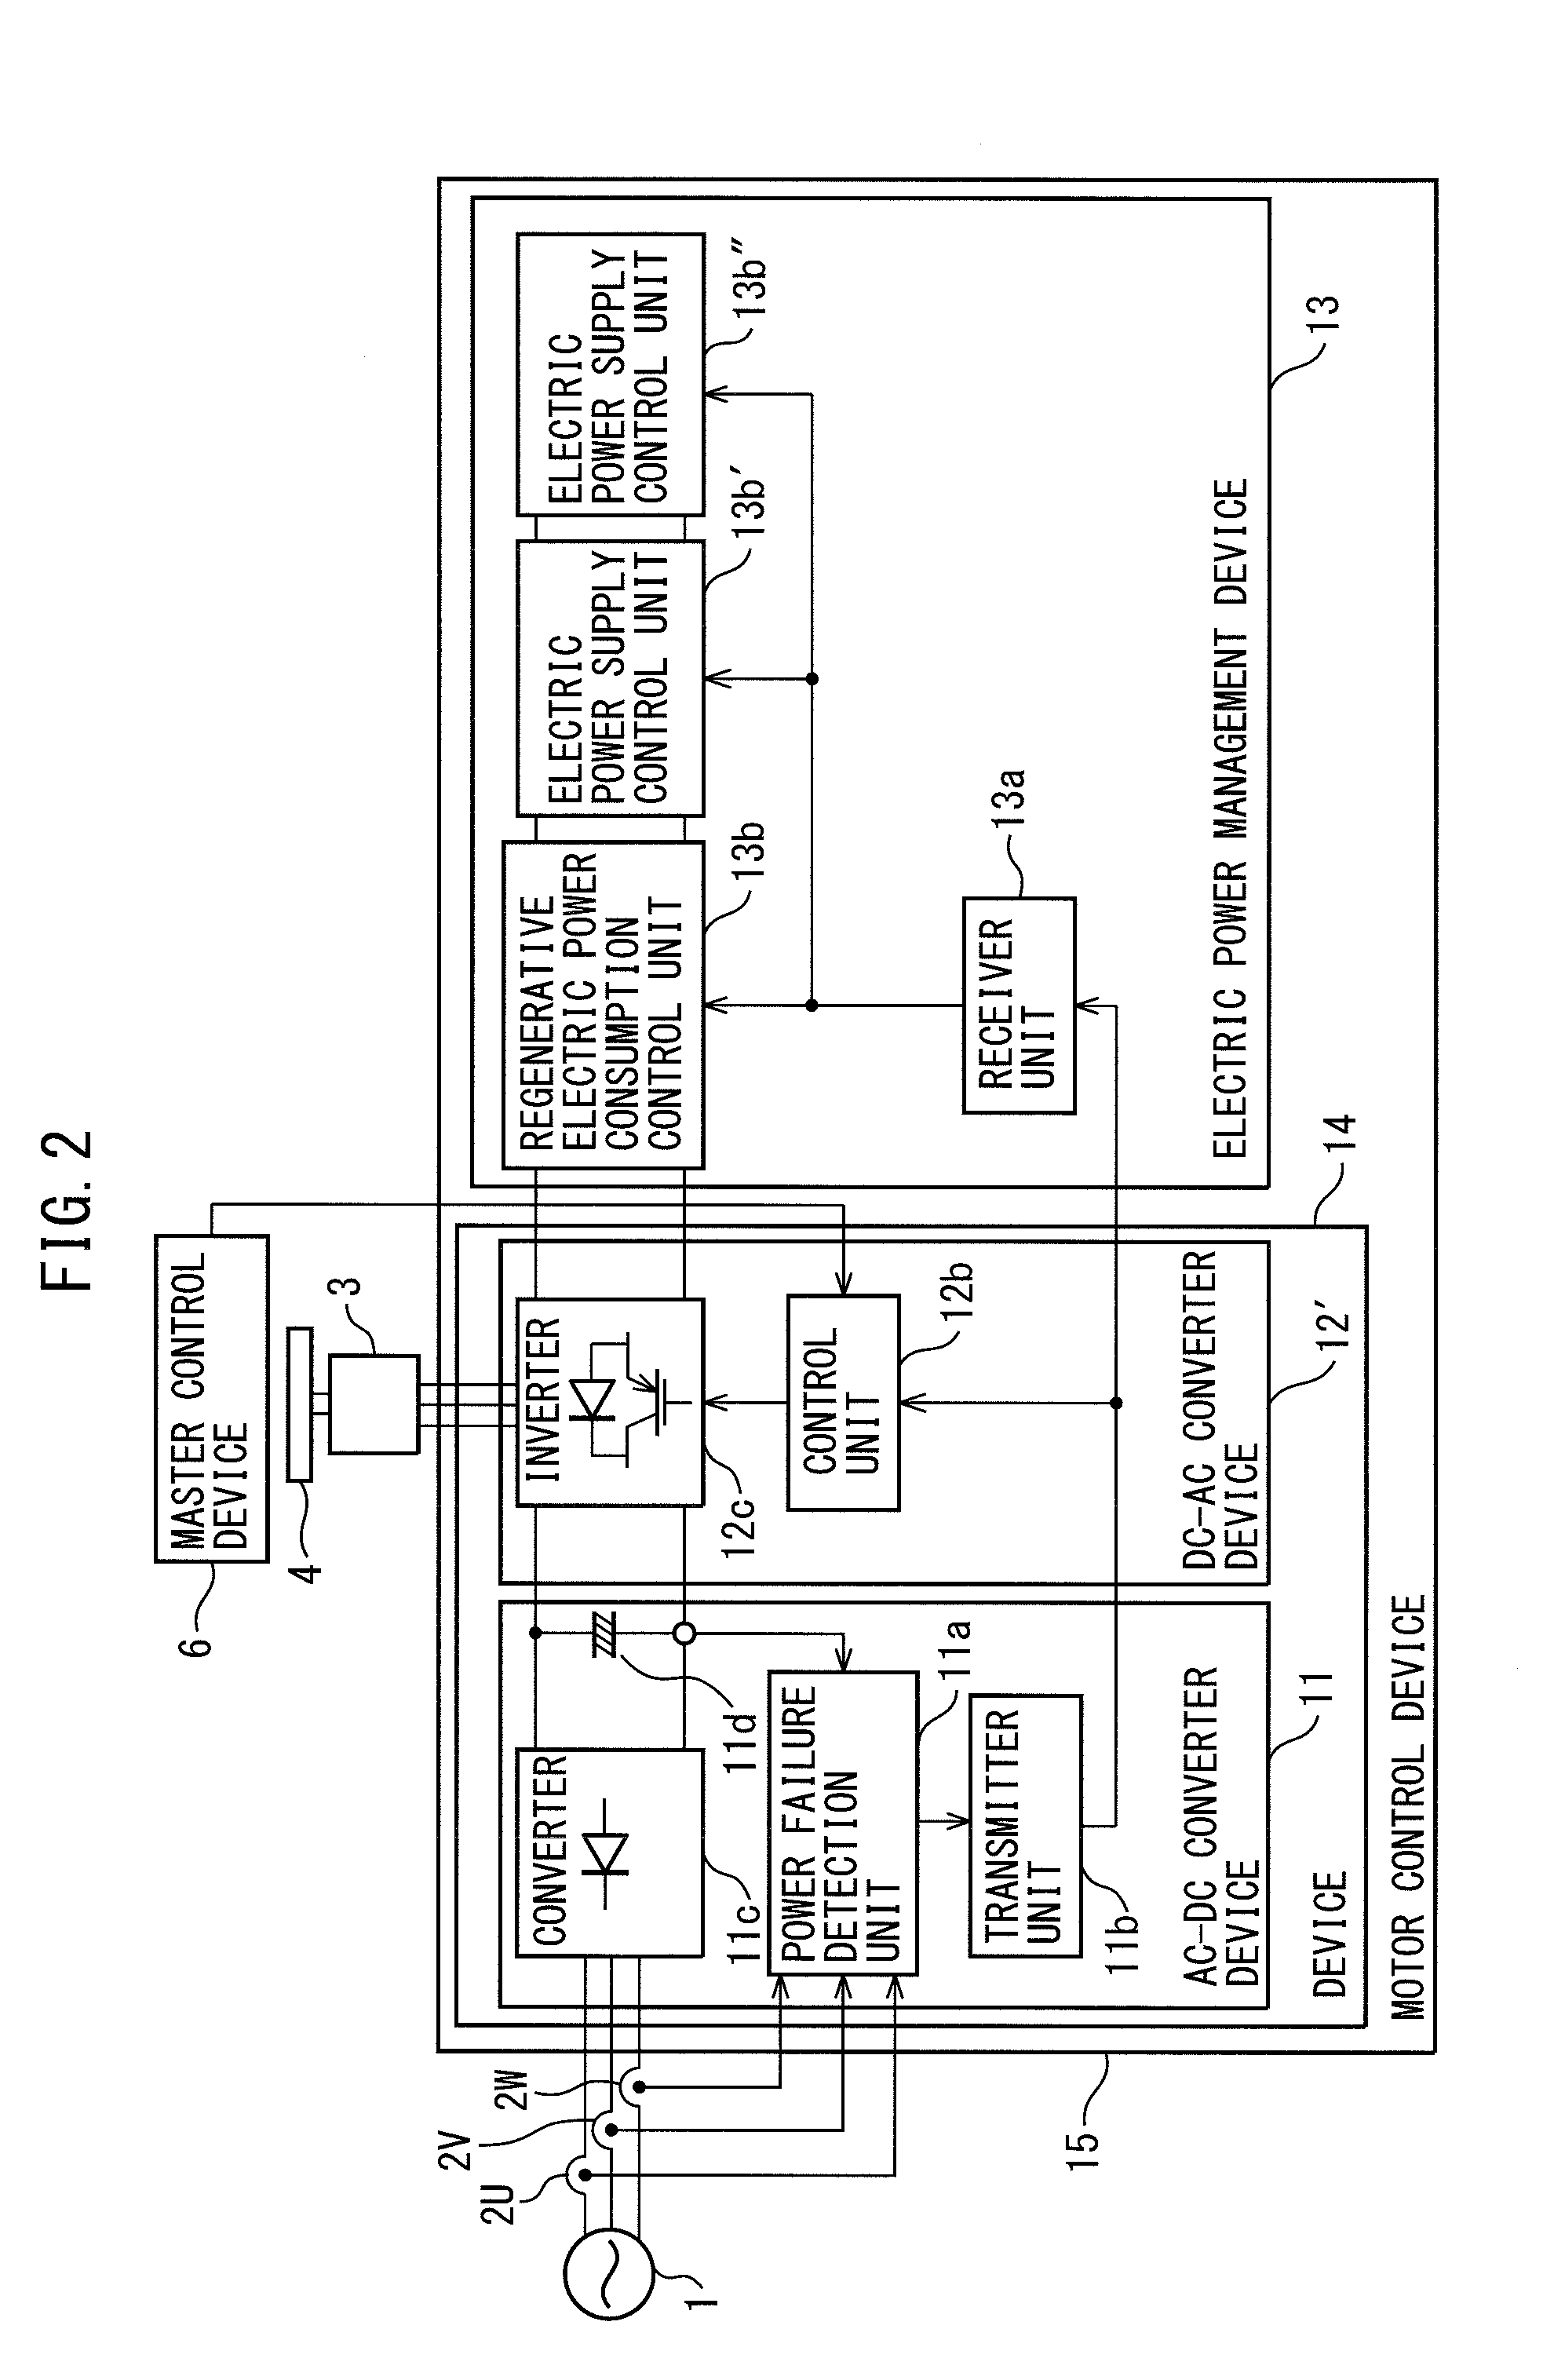 Motor control device provided with power failure management